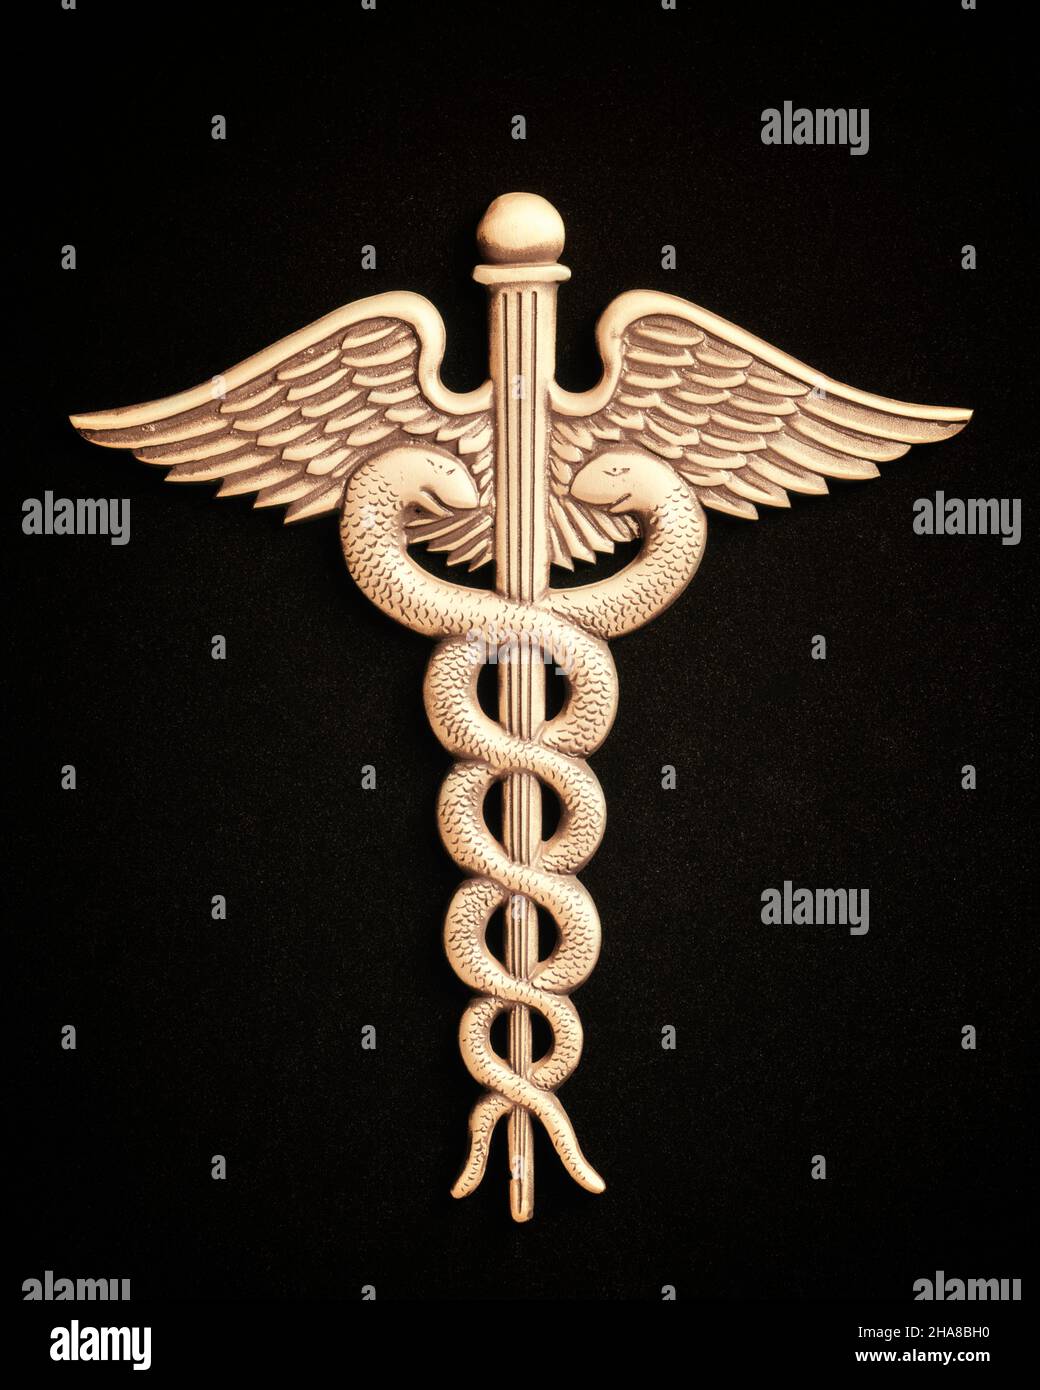 1990s CADUCEUS SILVER ON BLACK BACKGROUND THE AMERICAN SYMBOL OF ...